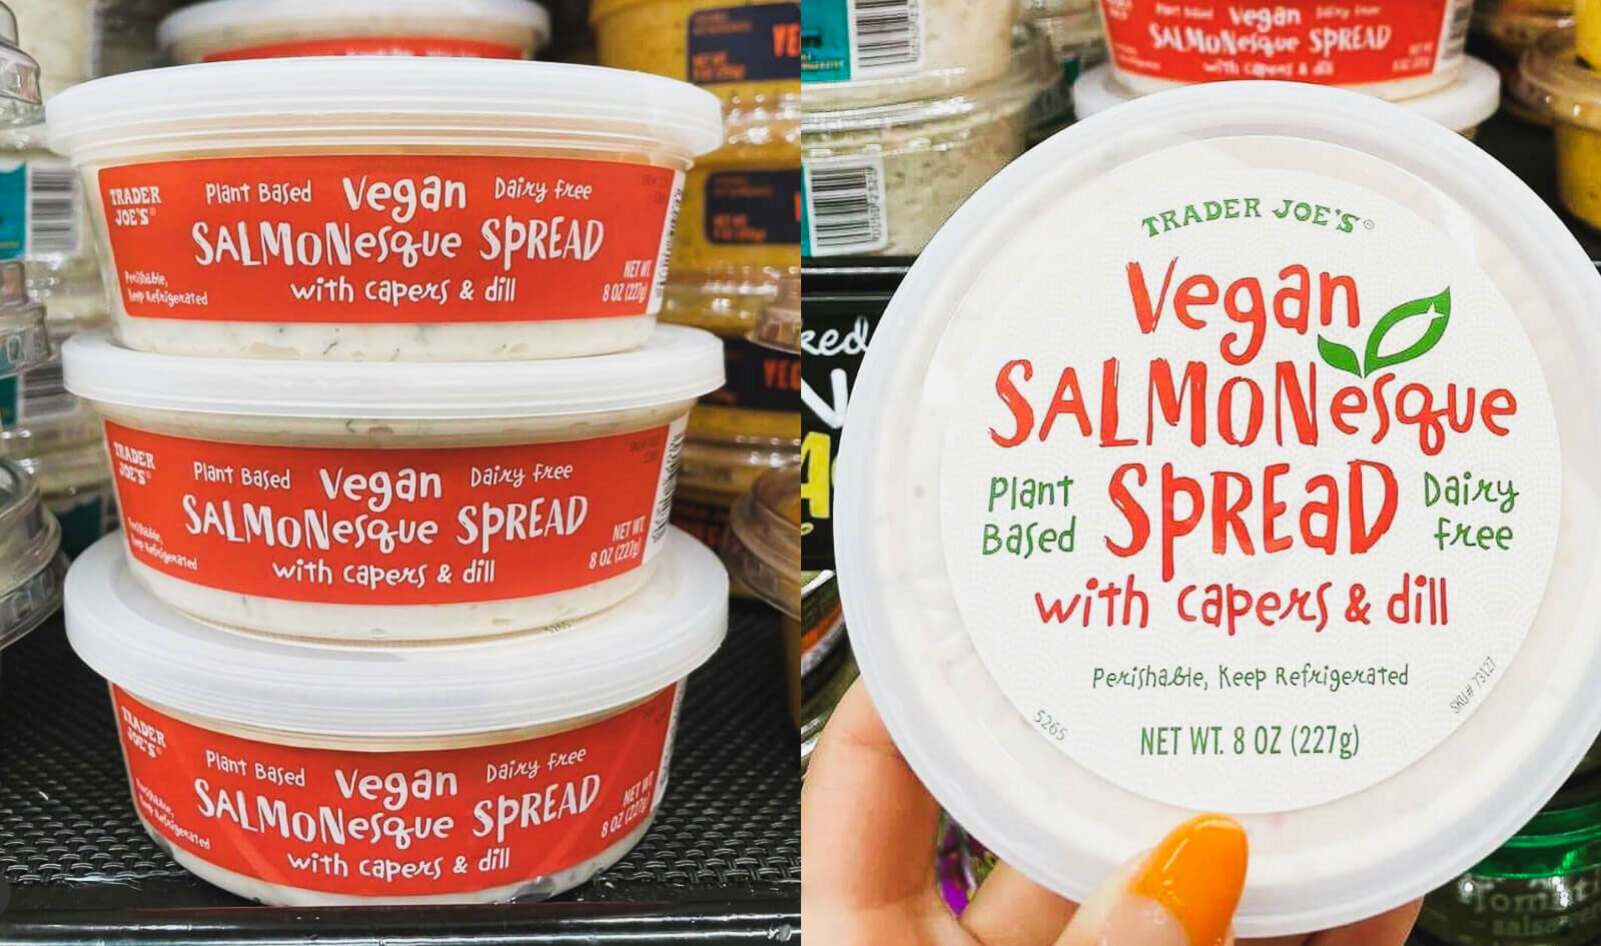 Vegan Fish Spreads Make a Splash from Trader Joe's to the Netherlands